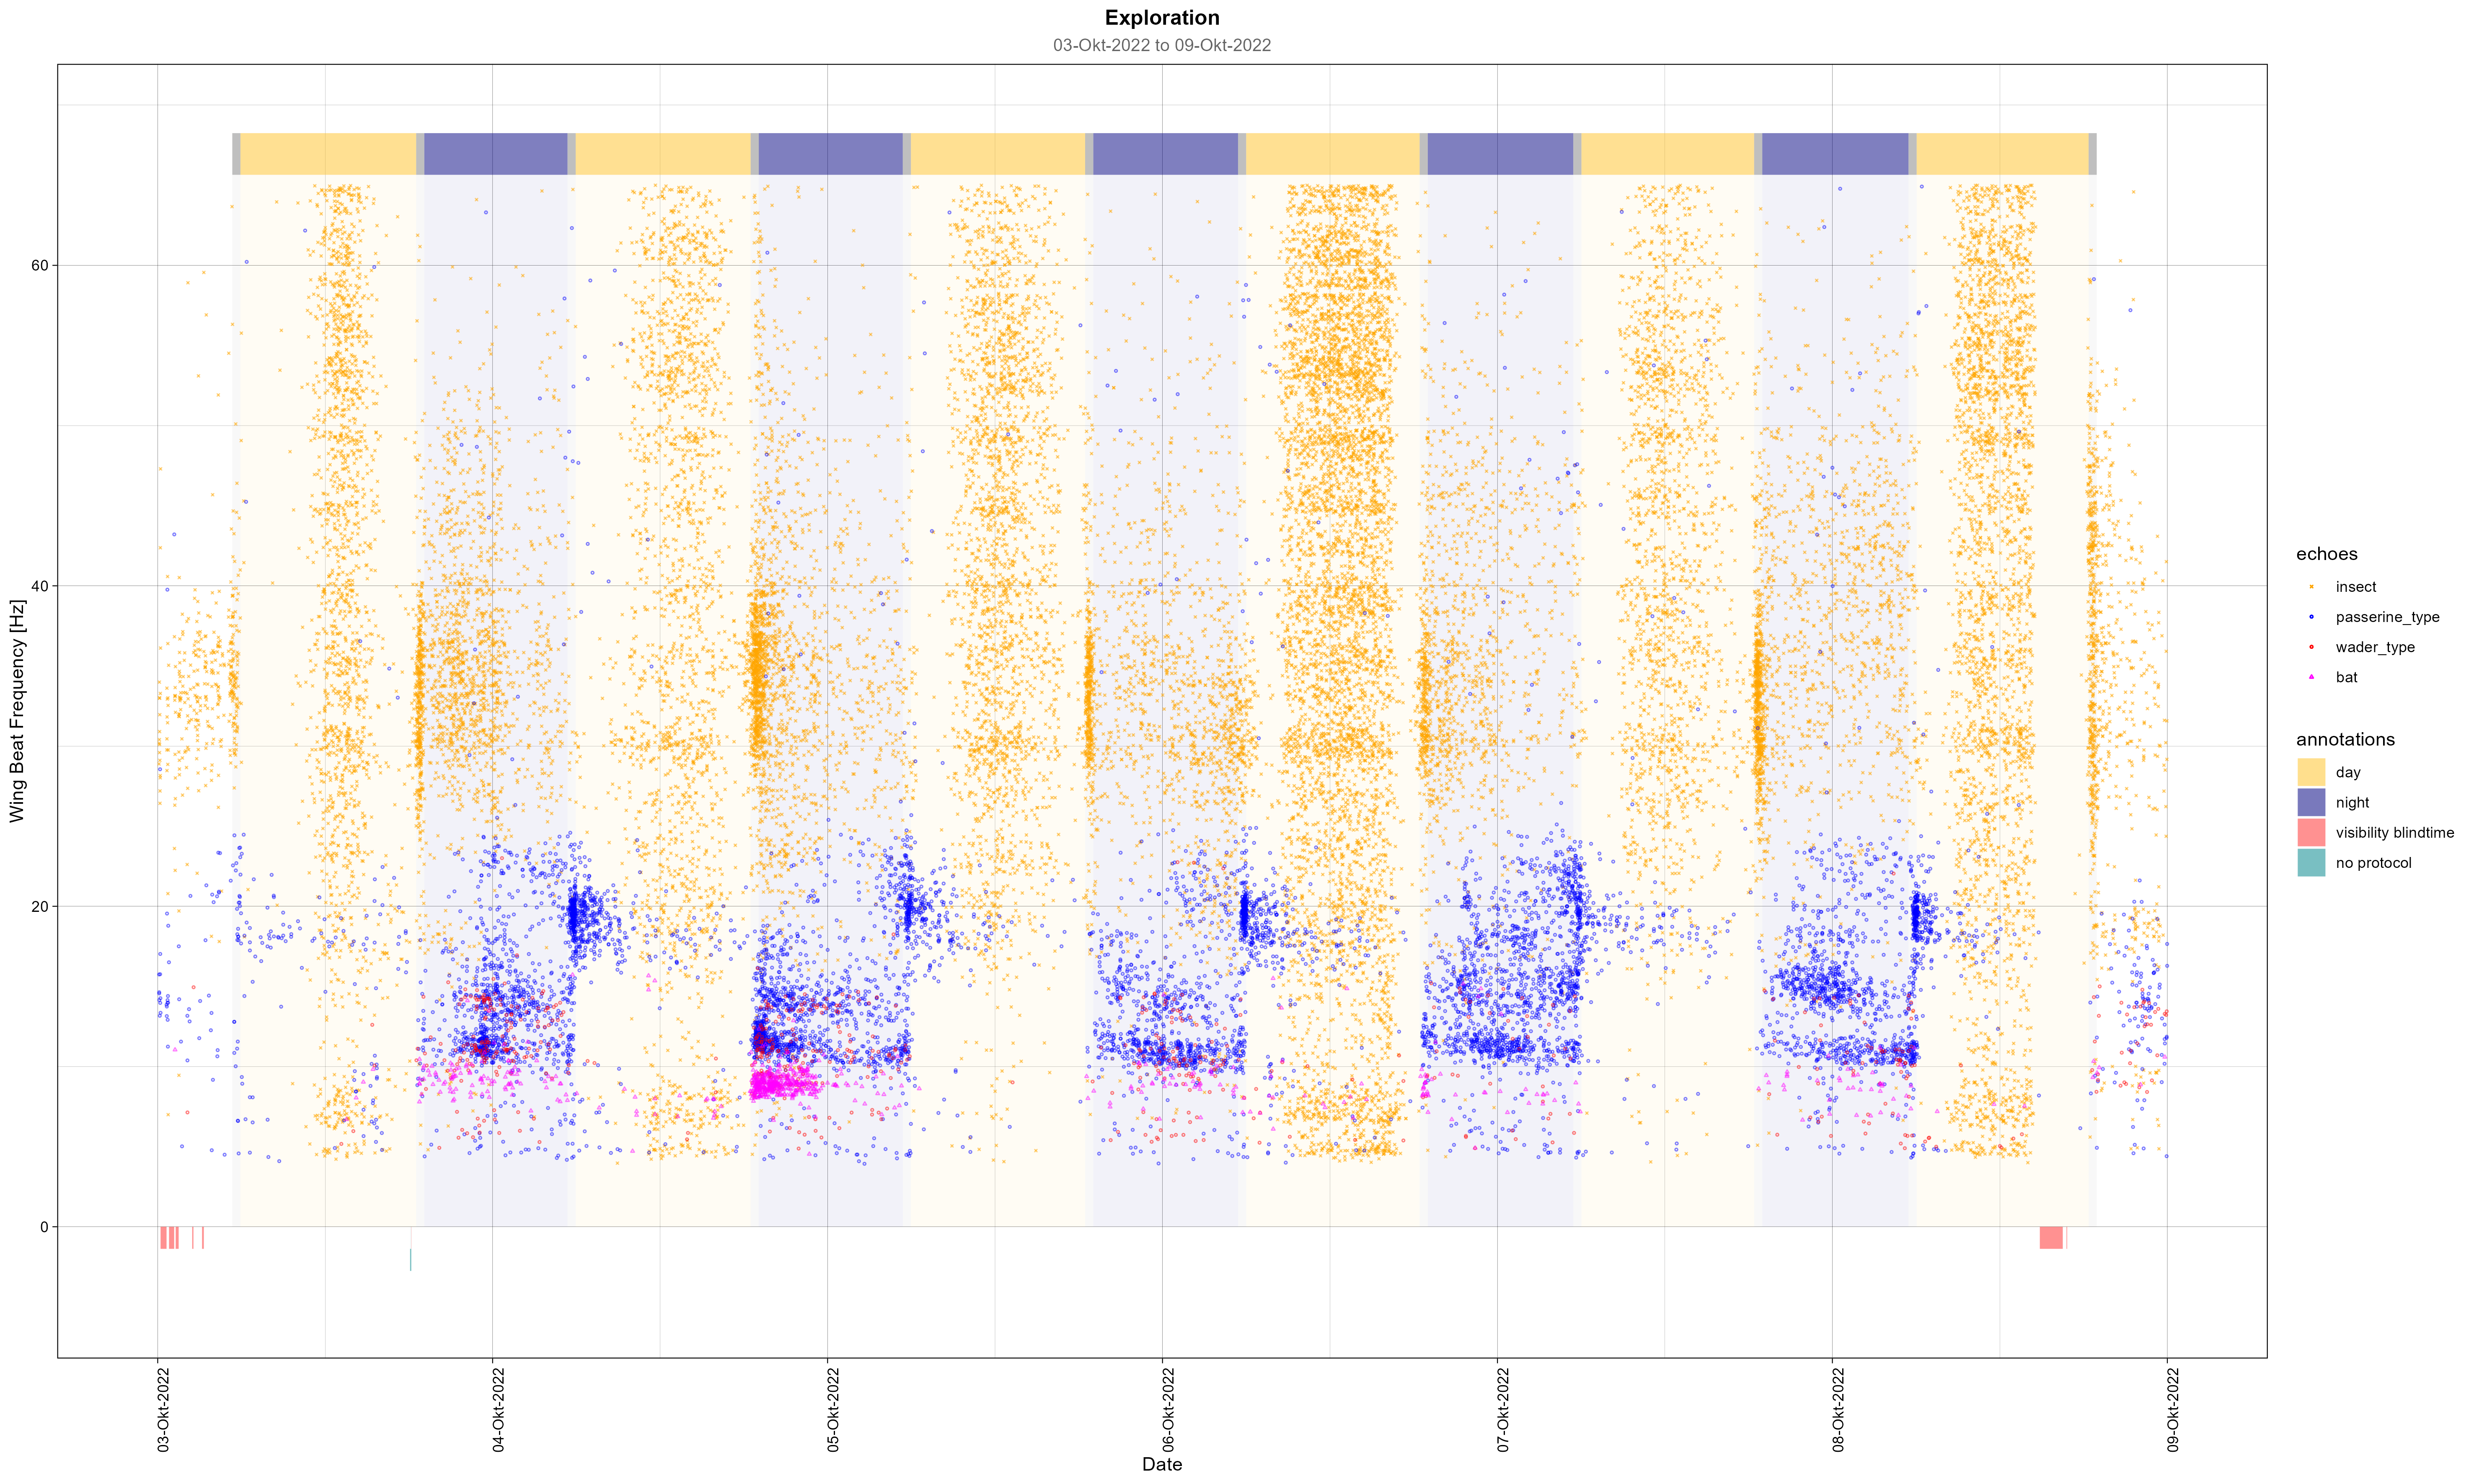 Scatter plot of wing beat frequencies over several days for passerines, waders, bats and insects